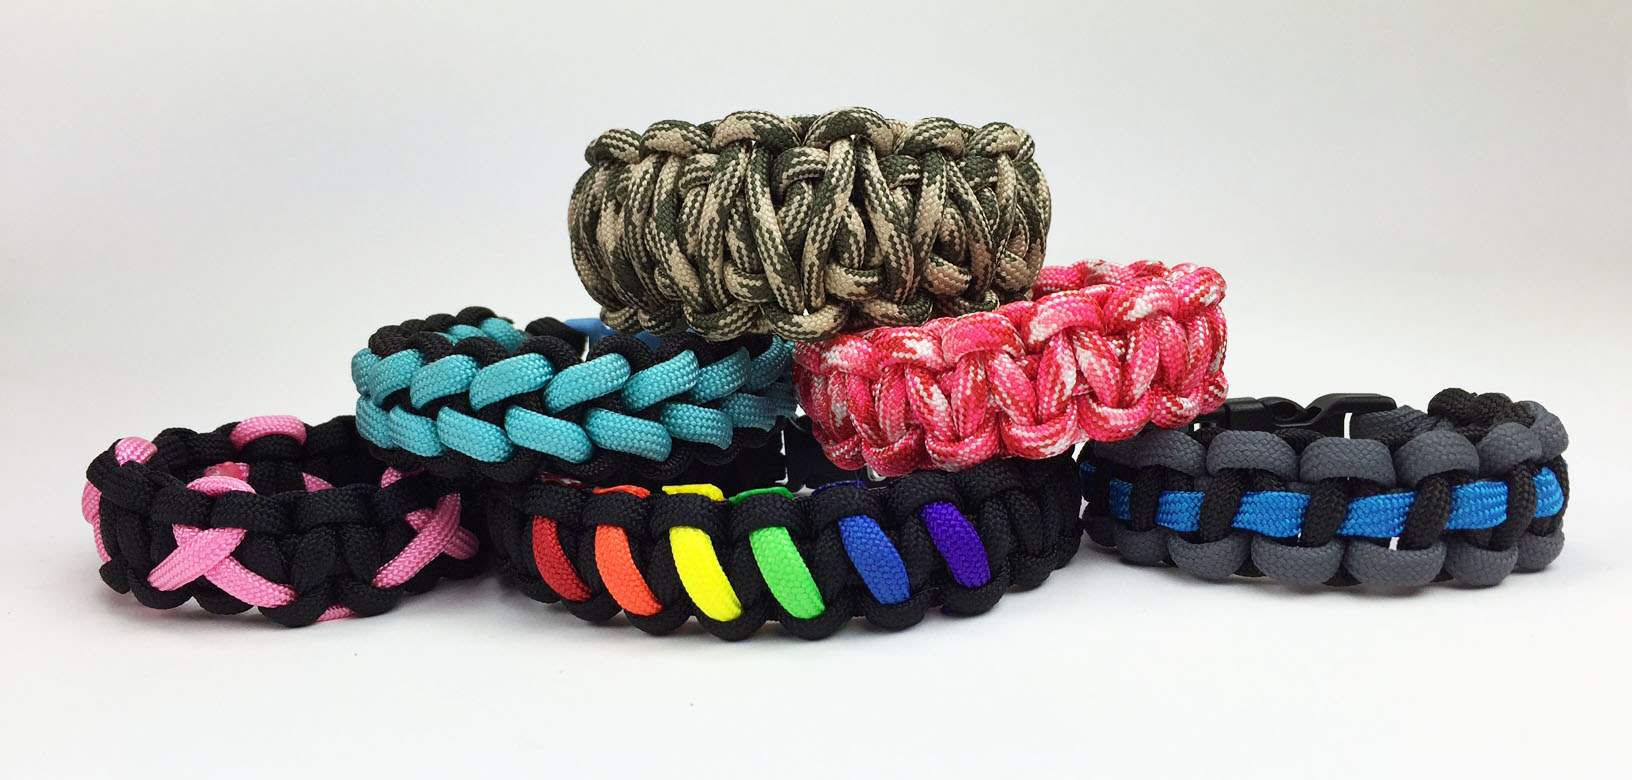 King Cobra knot on my paracord bracelet  Bob Squire  Flickr